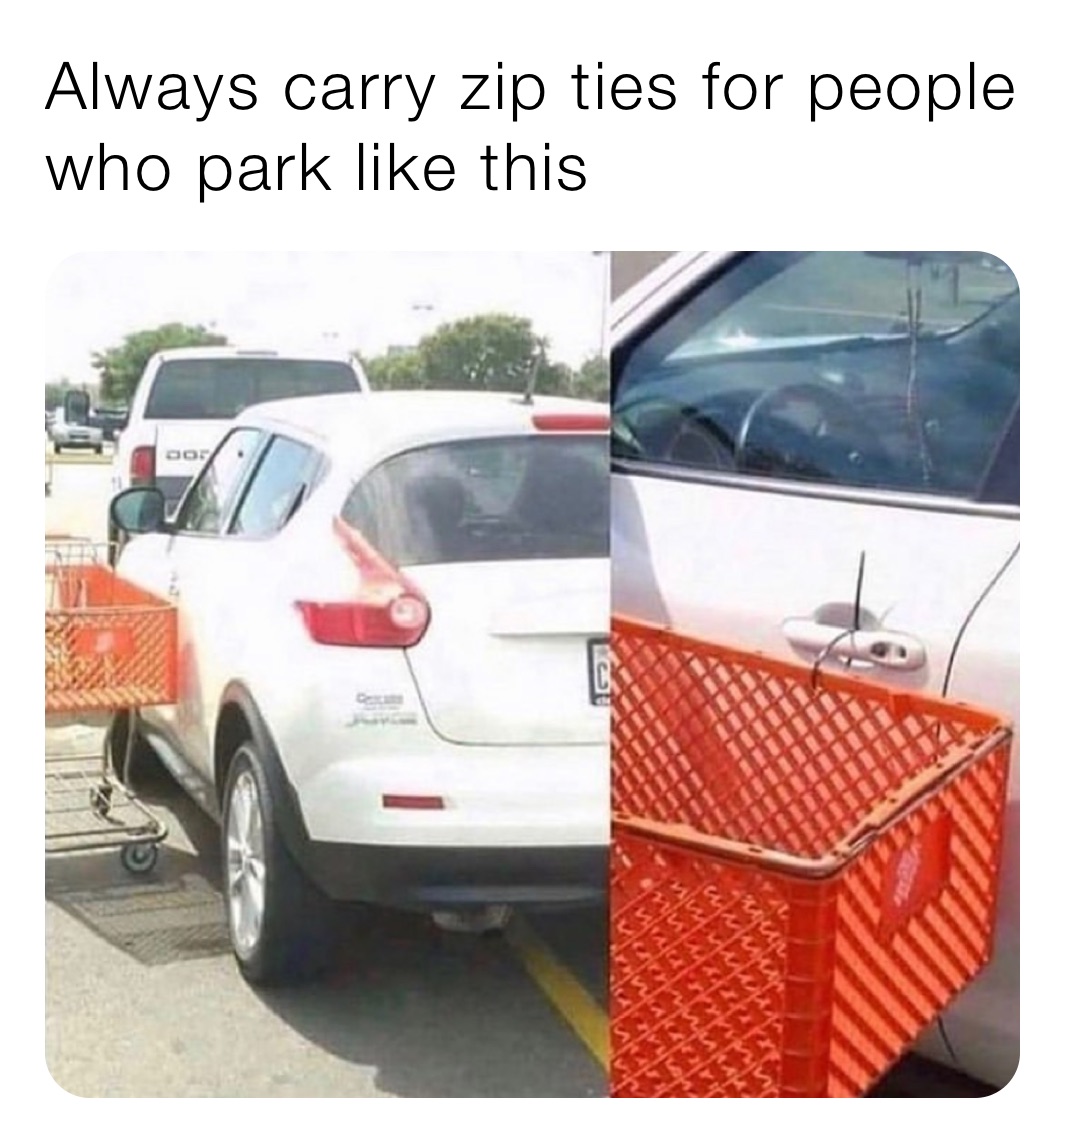 Always carry zip ties for people who park like this